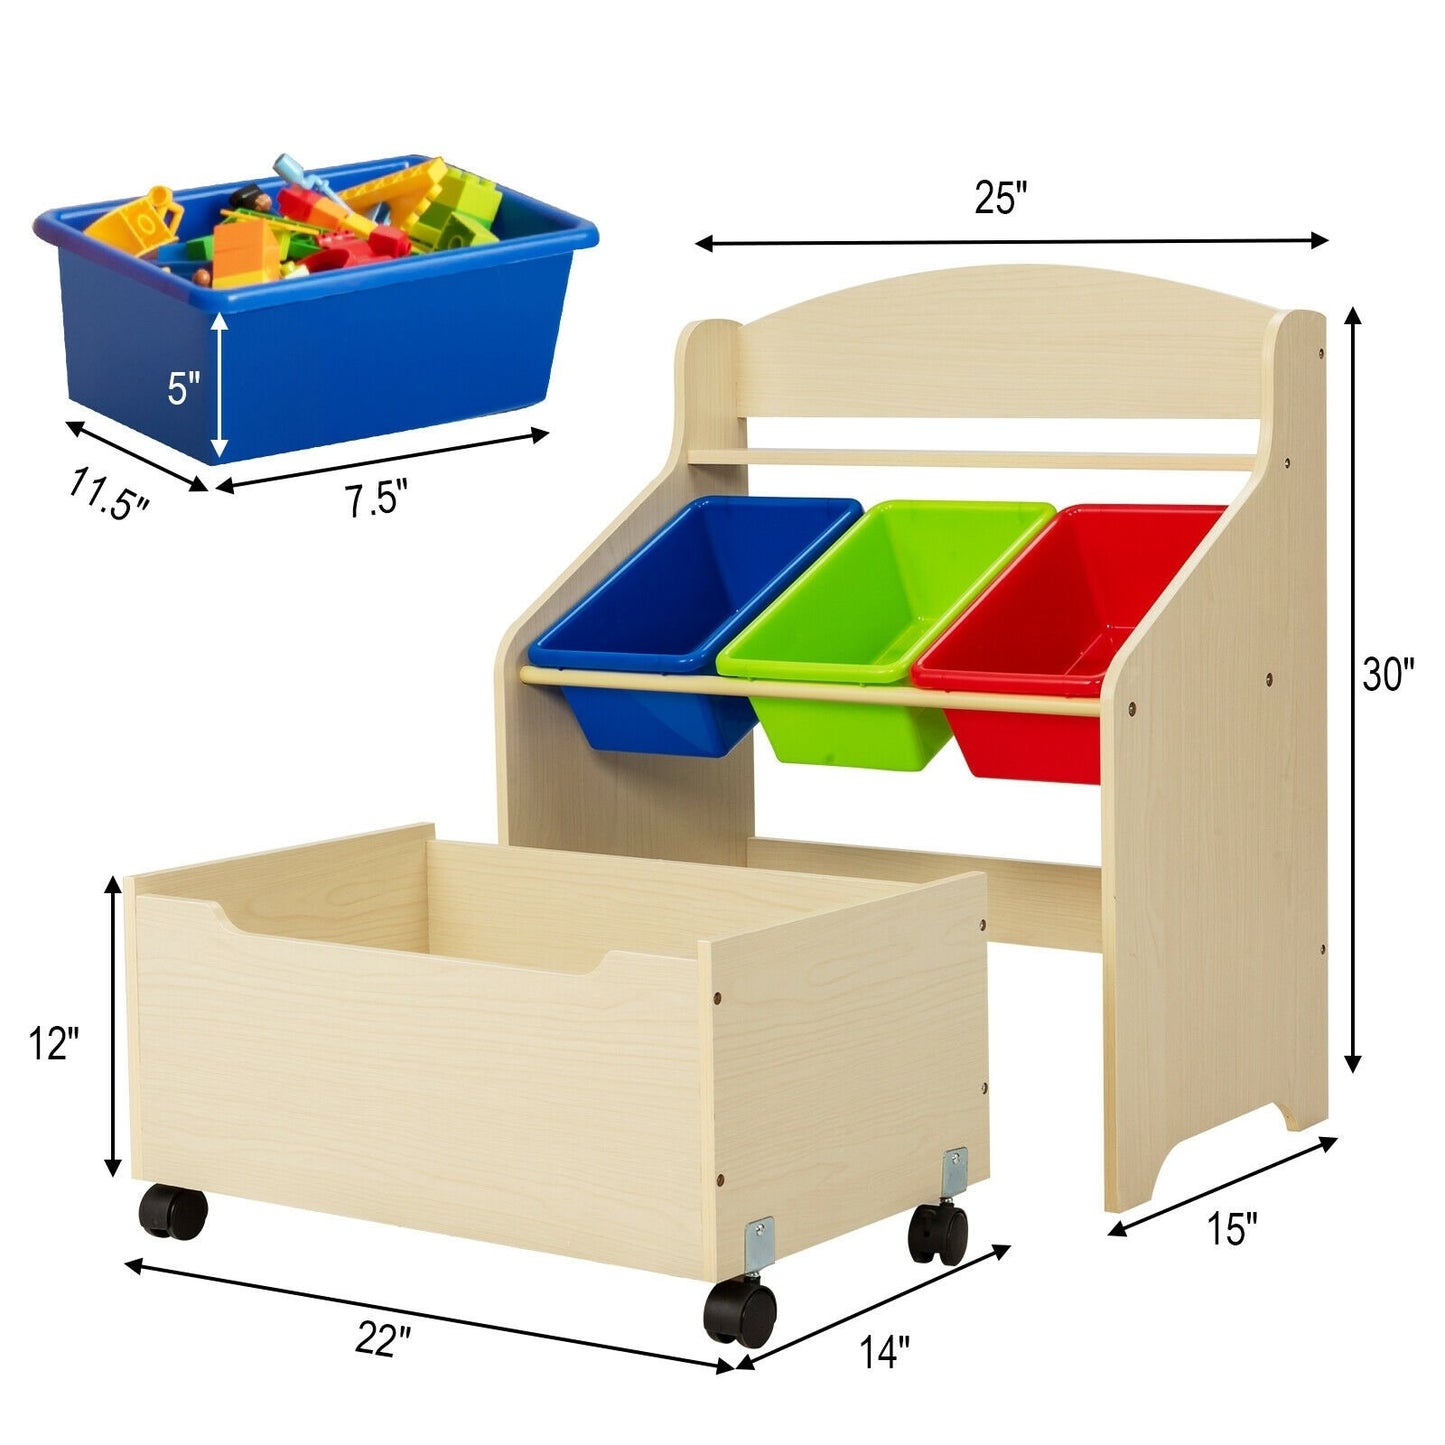 Kids Wooden Toy Storage Unit Organizer with Rolling Toy Box and Plastic Bins, Natural